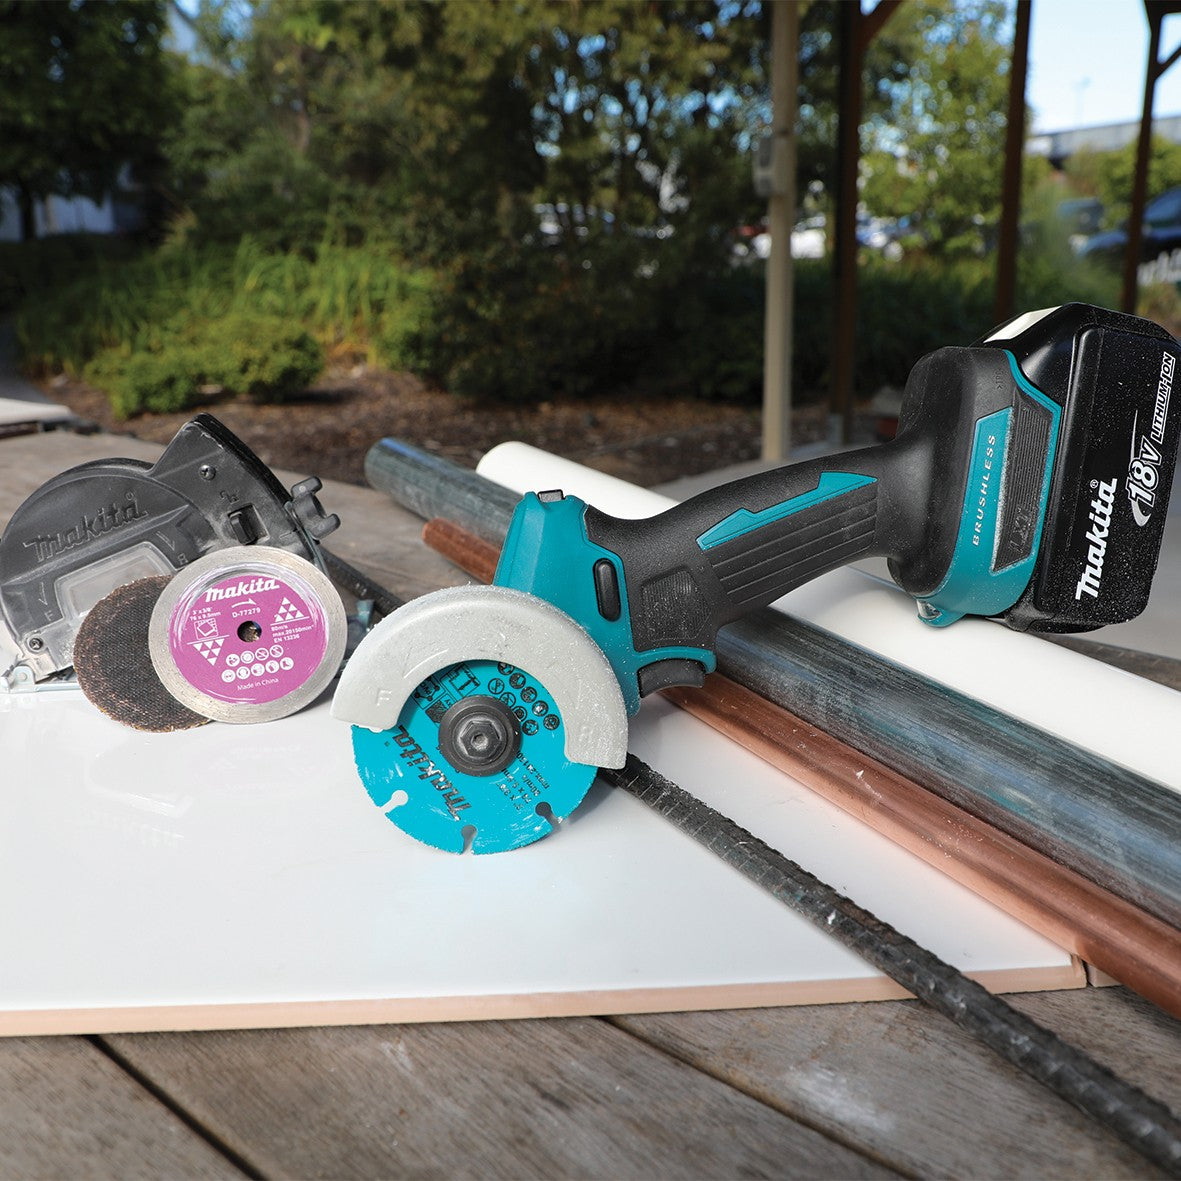 18V Brushless Compact 76mm Cut Off Saw Bare DMC300Z by Makita